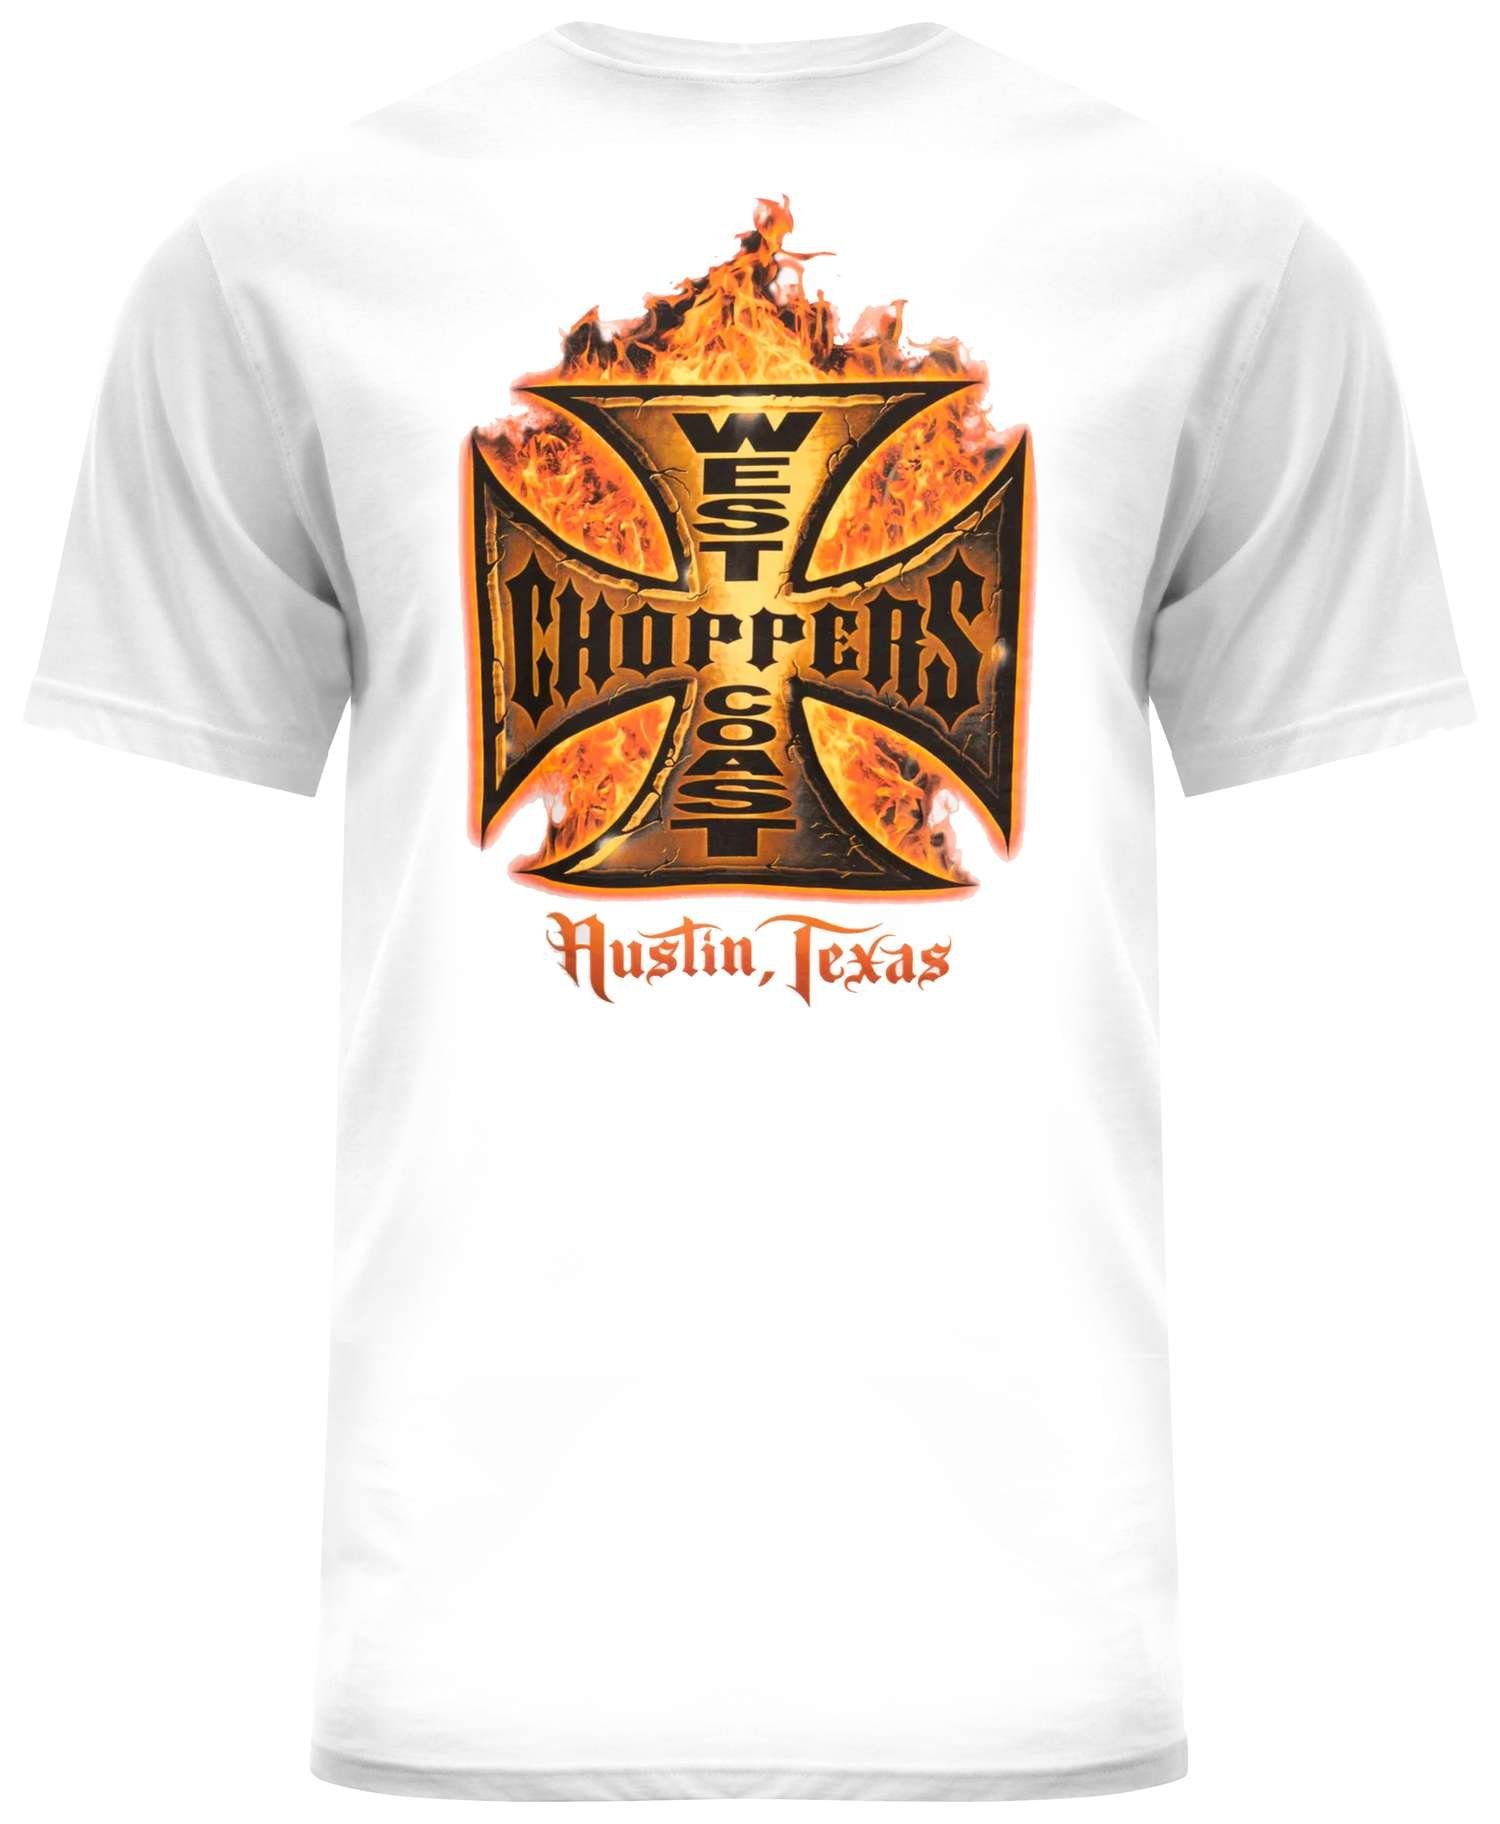 Coast In Flames WCC Choppers West T-Shirt